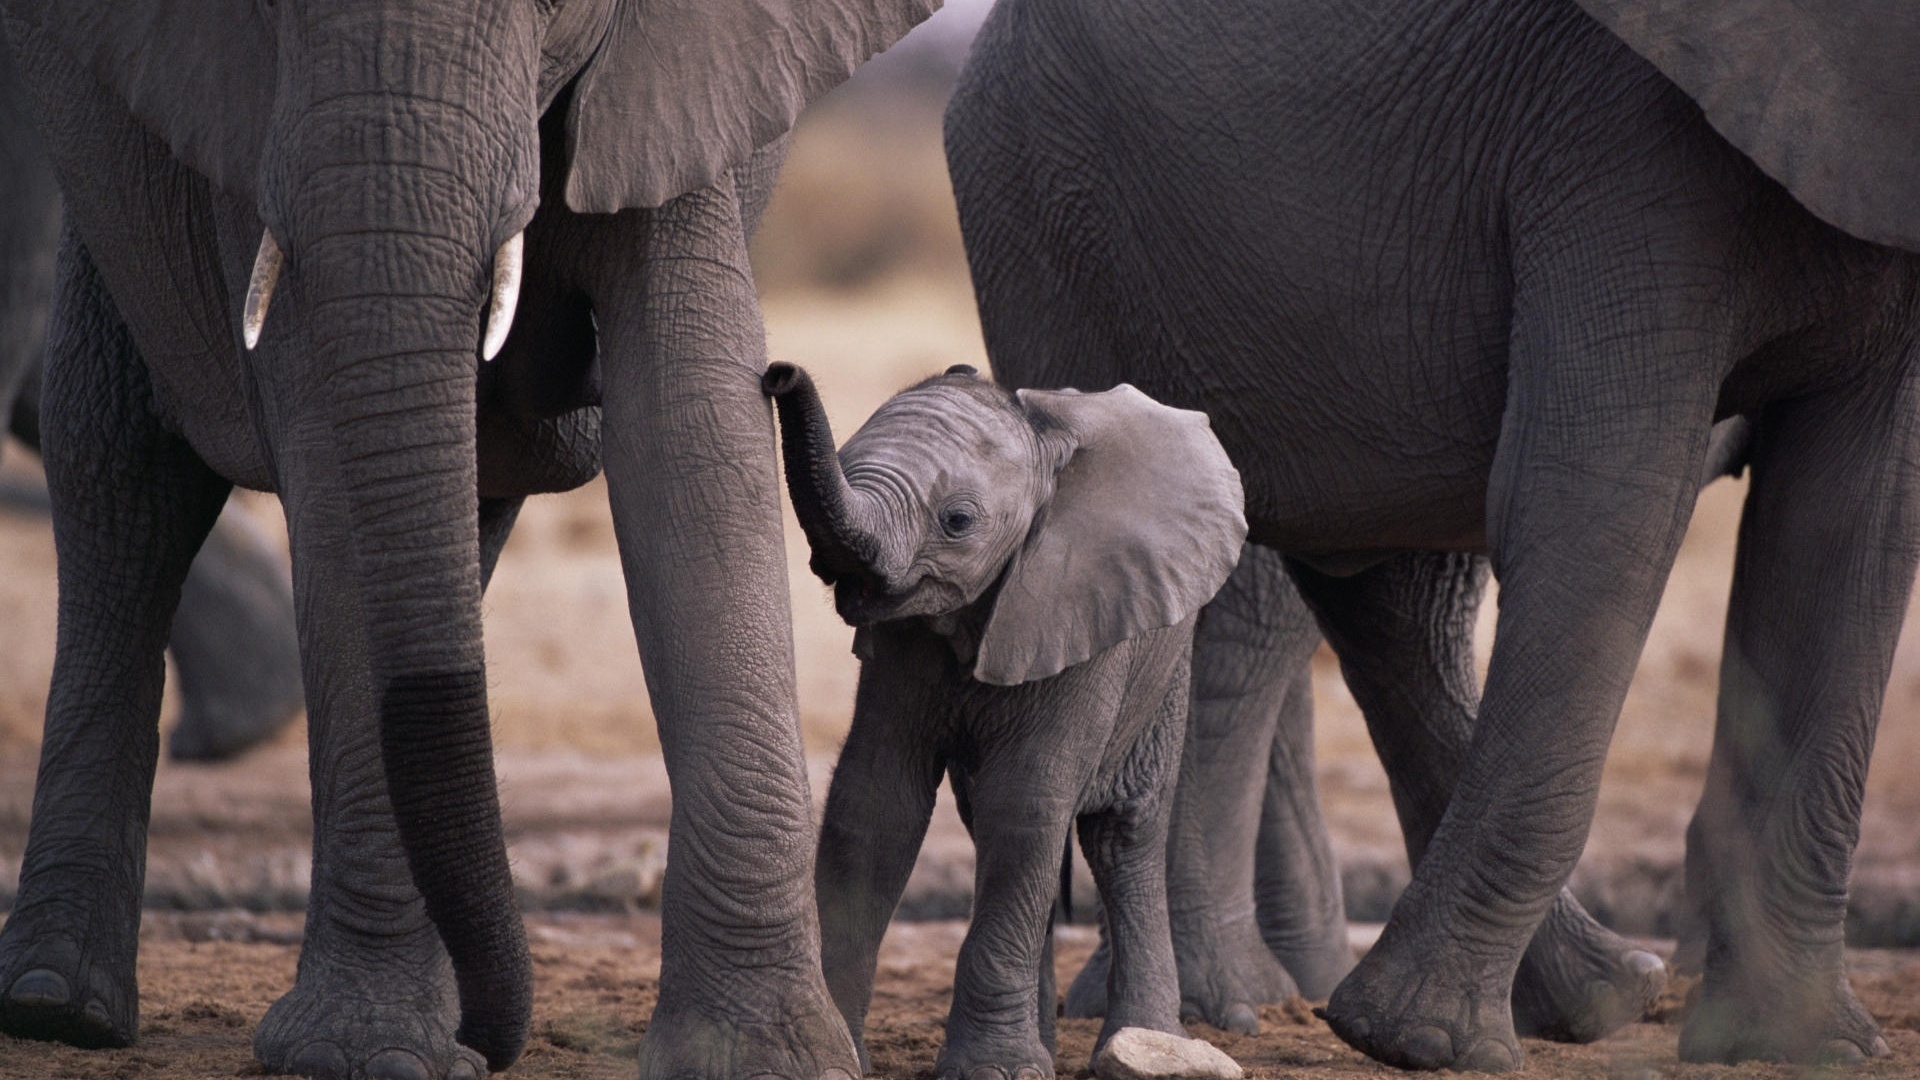 The little elephant raised his trunk.